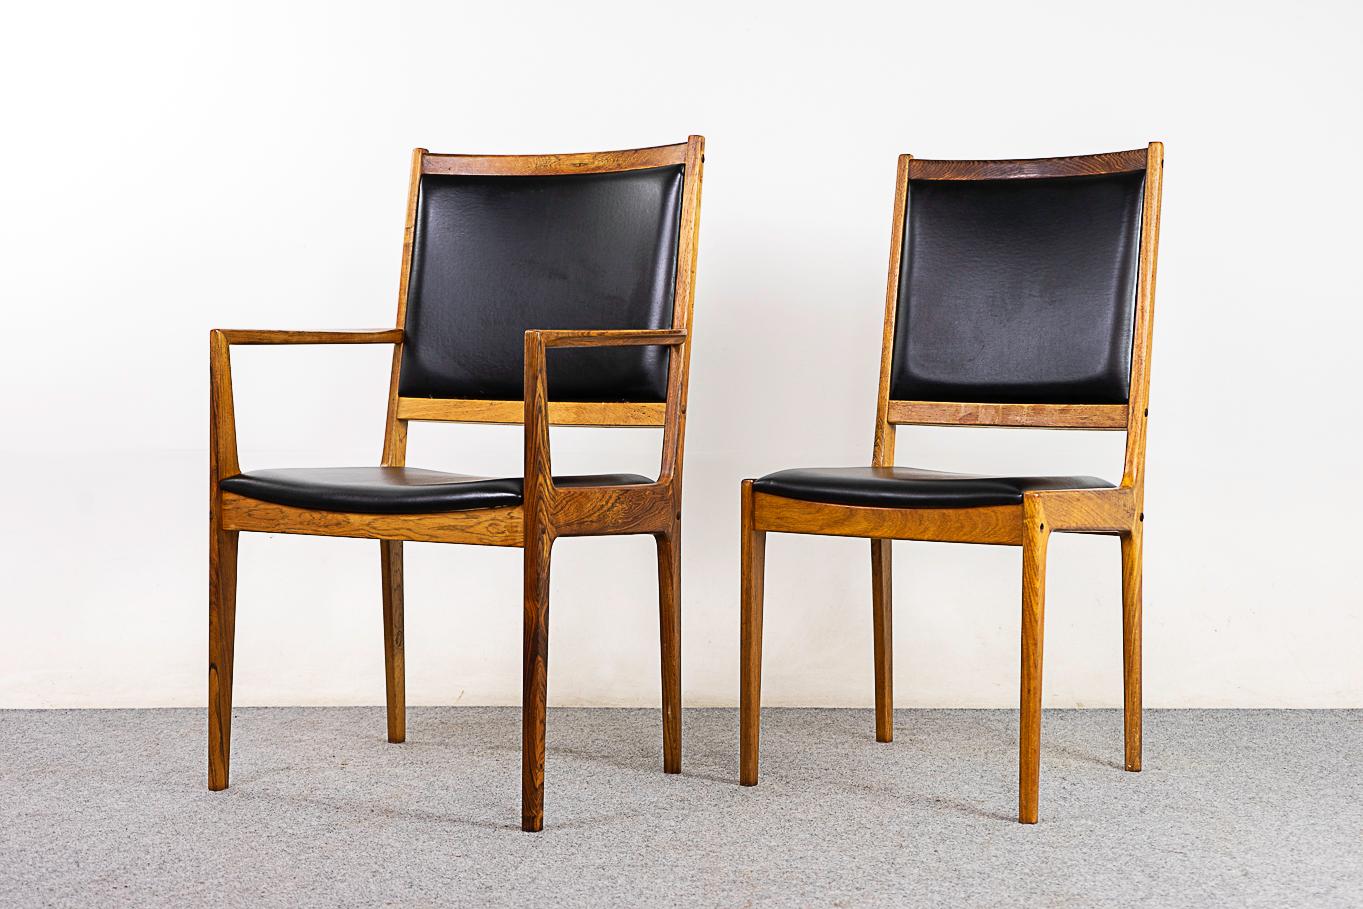 Rosewood dining chairs, circa 1960's. Beautiful angled joinery and clean modern lines, a very elegant presence. Original vinyl upholstery in nice condition.

Unrestored item with option to purchase in restored condition for an additional $1000 USD.